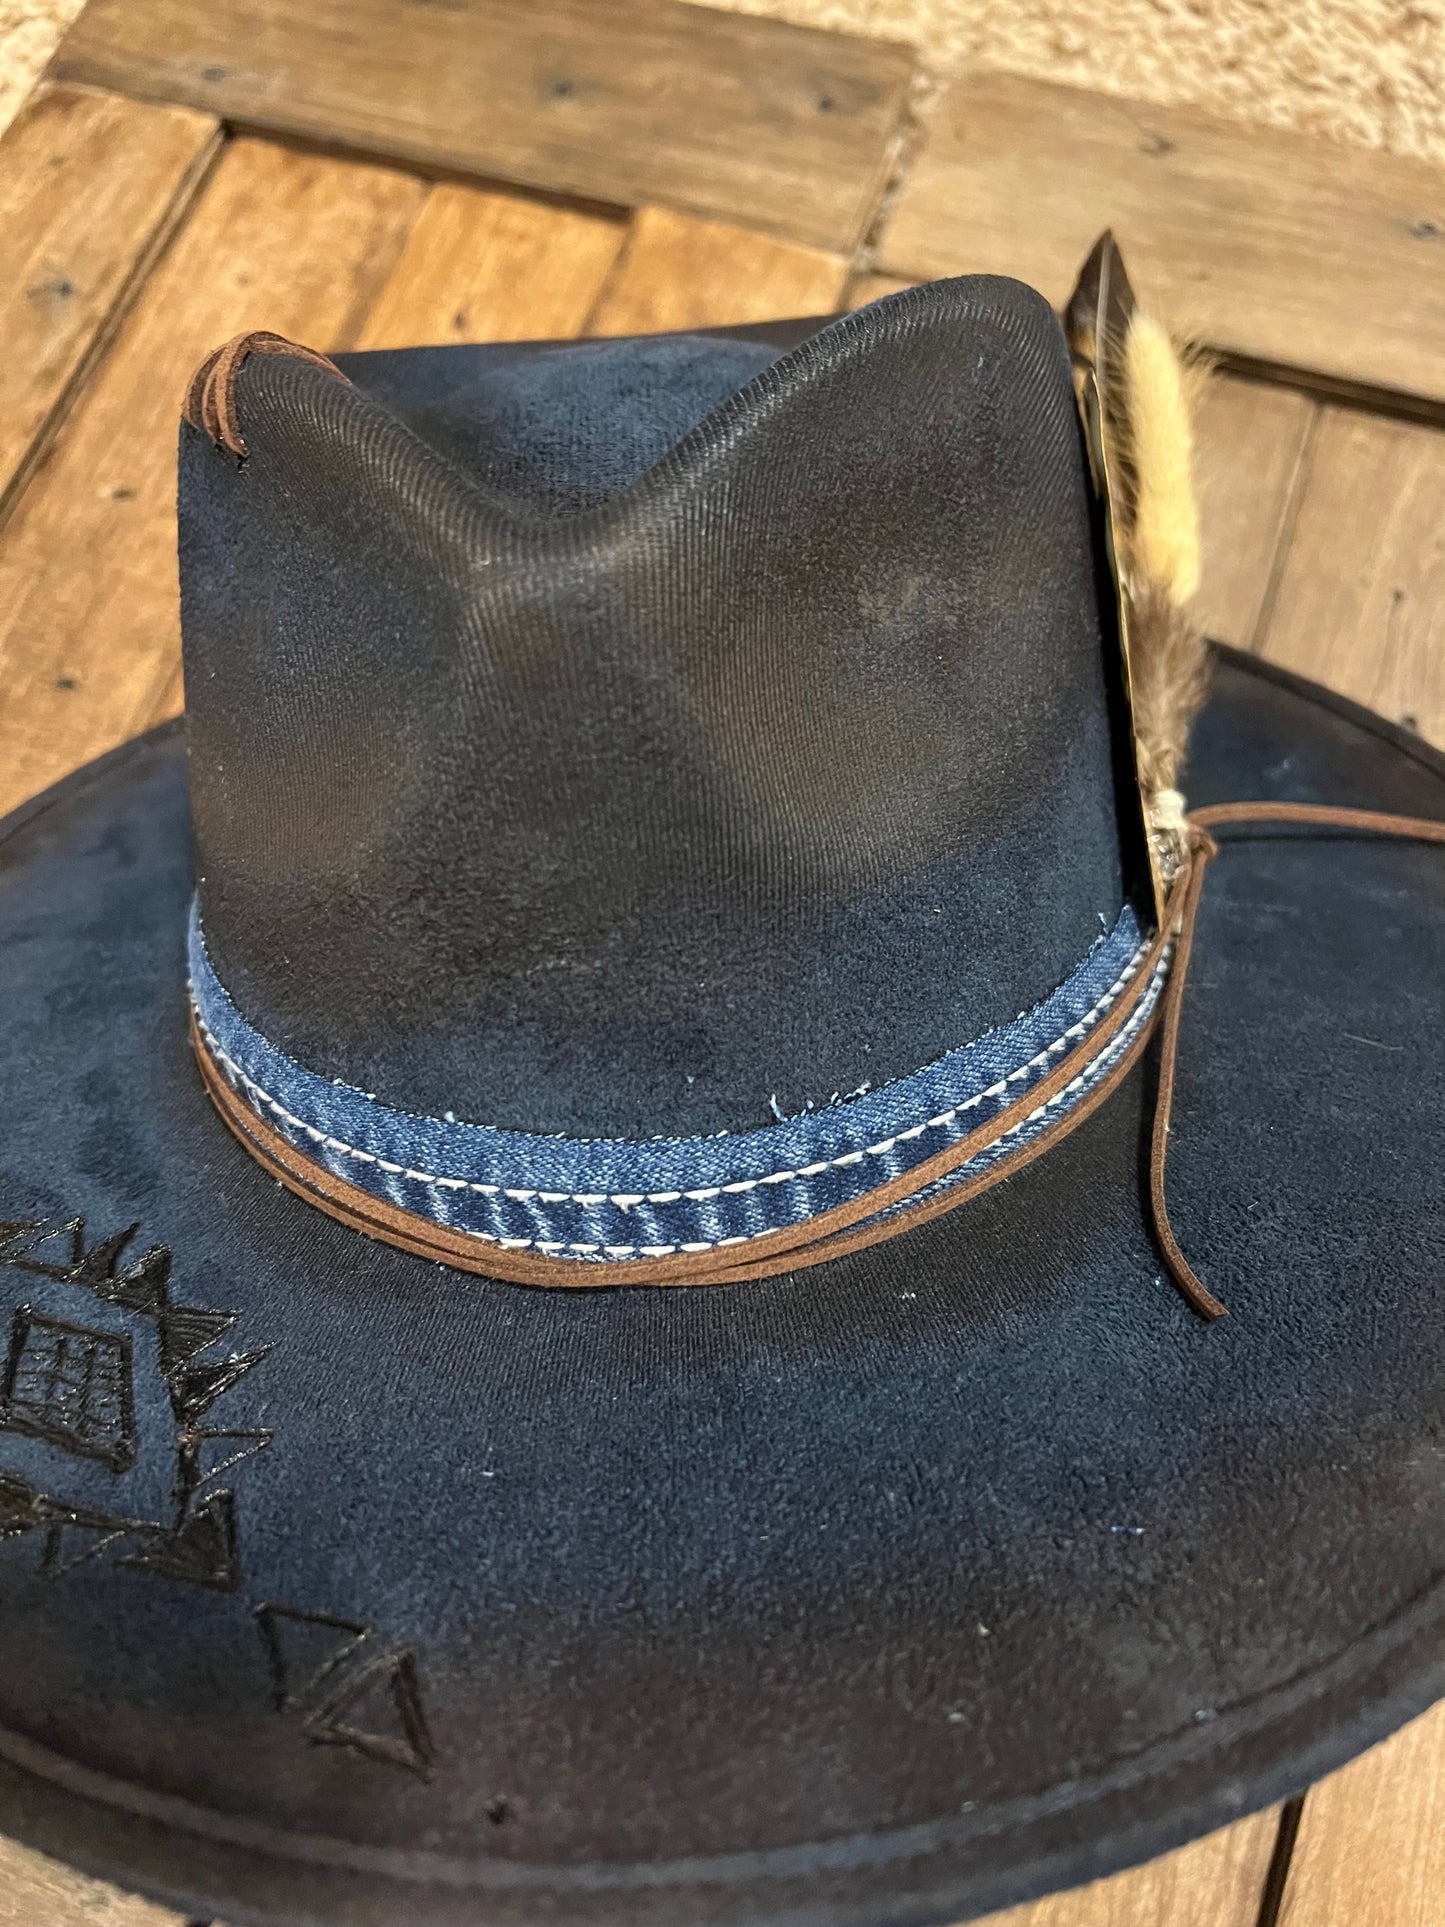 #121 - Old Blue Western or Rancher Hat